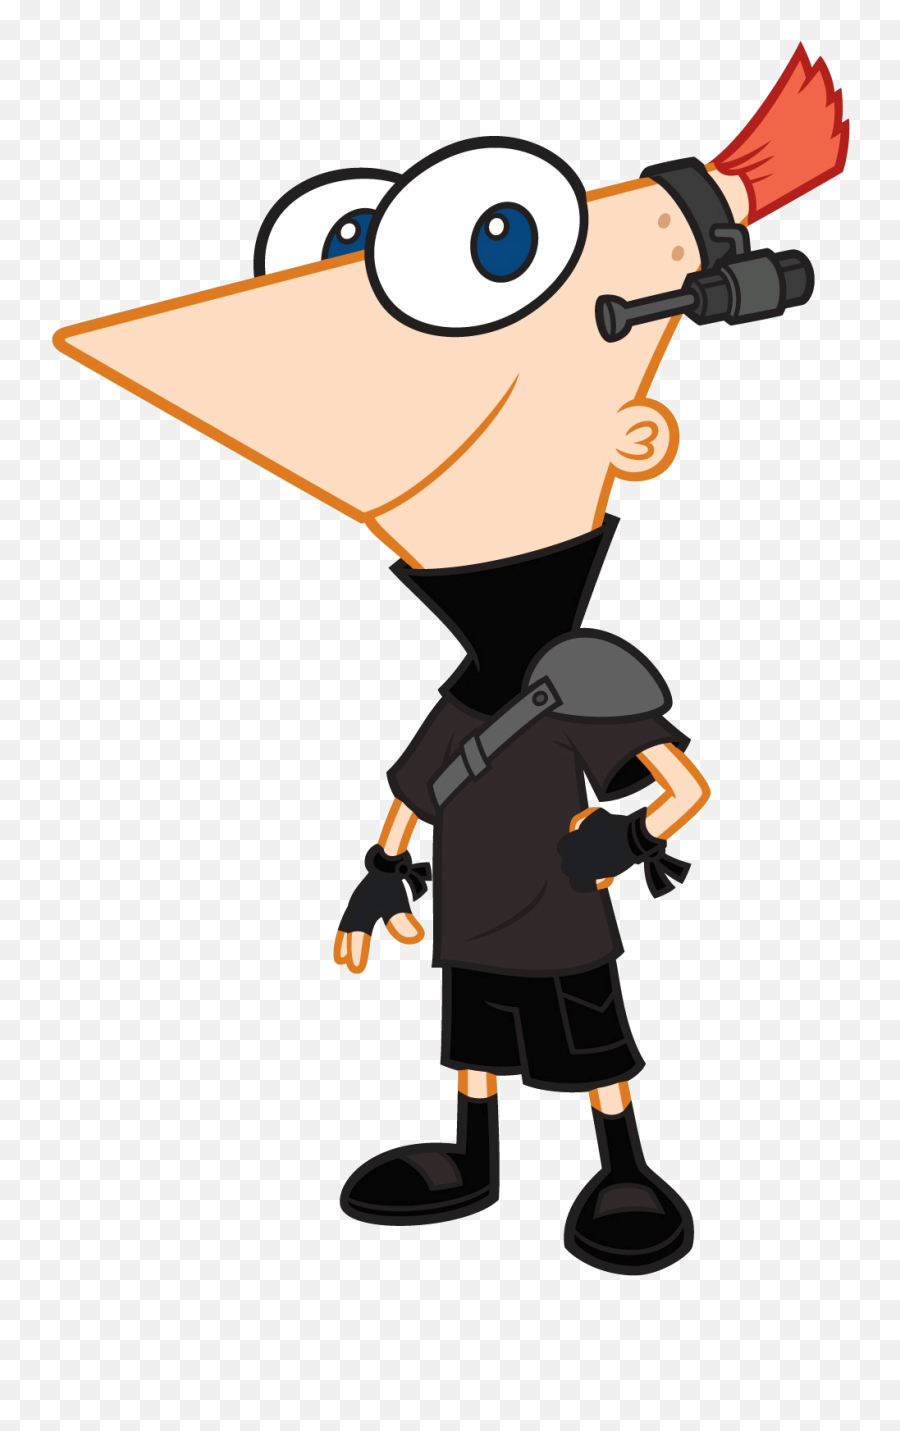 Phineas Flynn - Phineas And Ferb The Movie Across The 2nd Dimension Phineas Png,Phineas And Ferb Logo